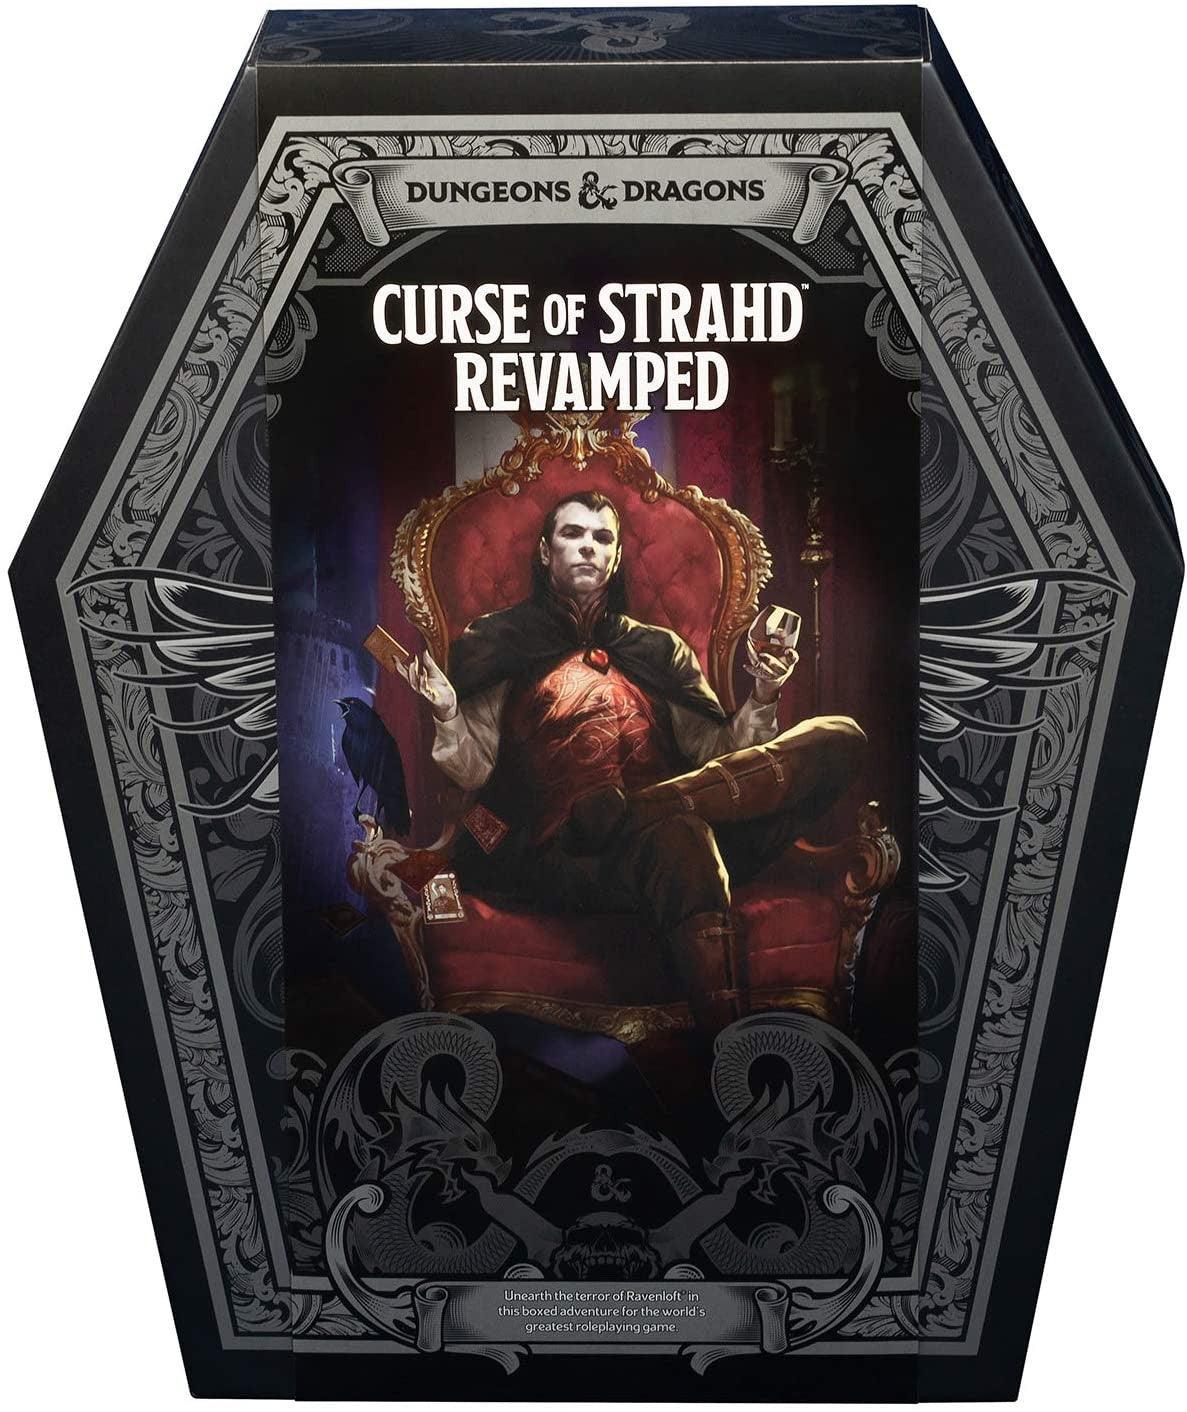 VR-87531 D&D Dungeons & Dragons Curse of Strahd Revamped - Wizards of the Coast - Titan Pop Culture